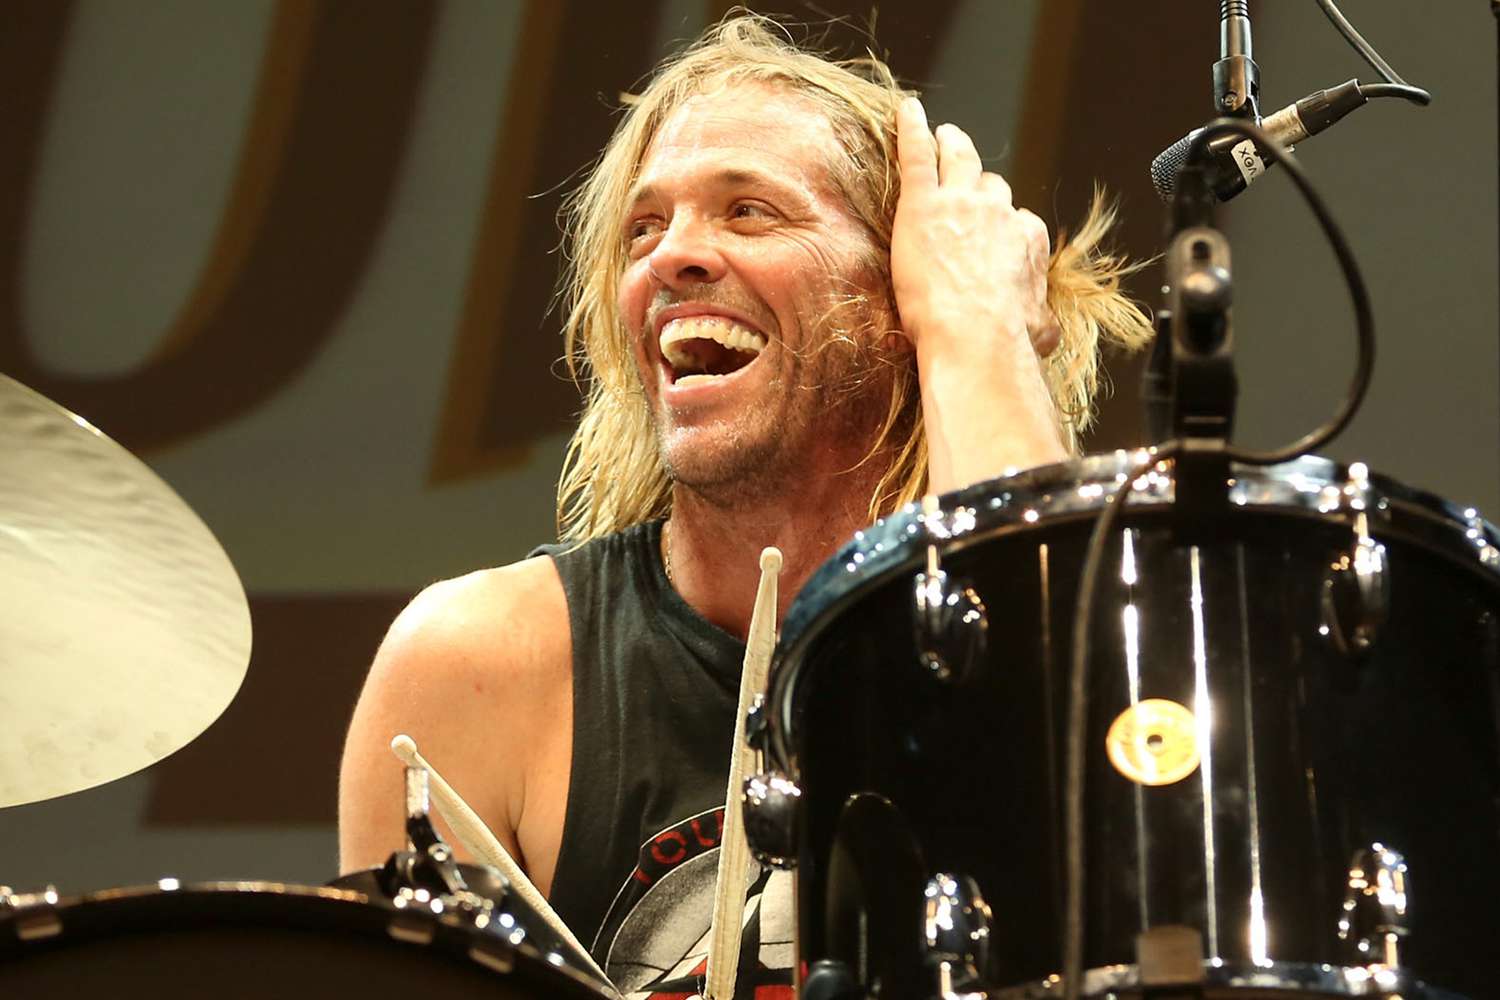 Watch Taylor Hawkins' son perform 'My Hero' with Foo Fighters at London tribute concert